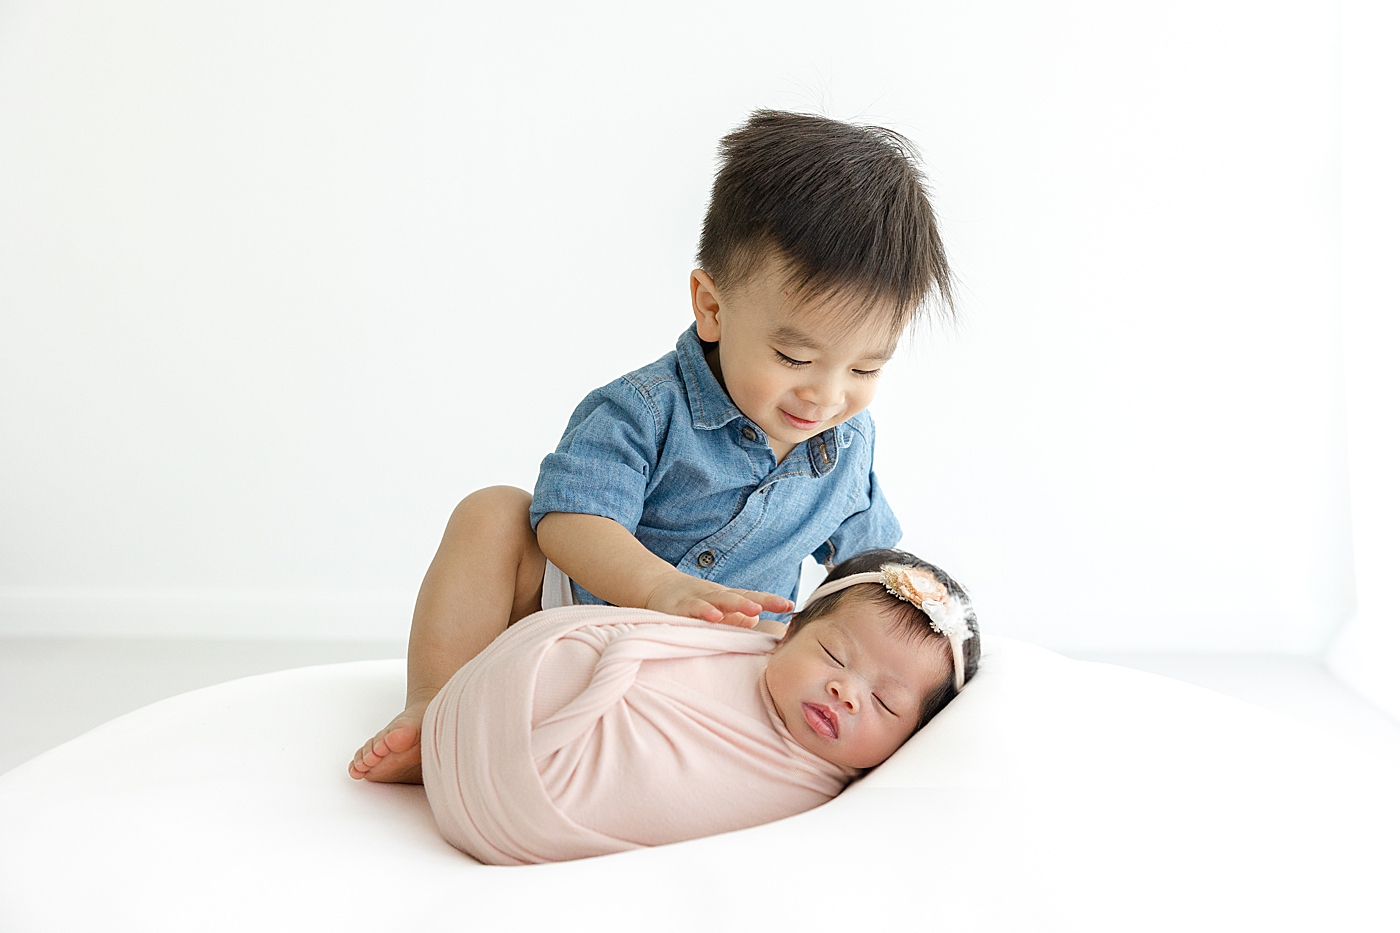 Big brother in blue sitting with his newborn baby sister | Image by Sana Ahmed